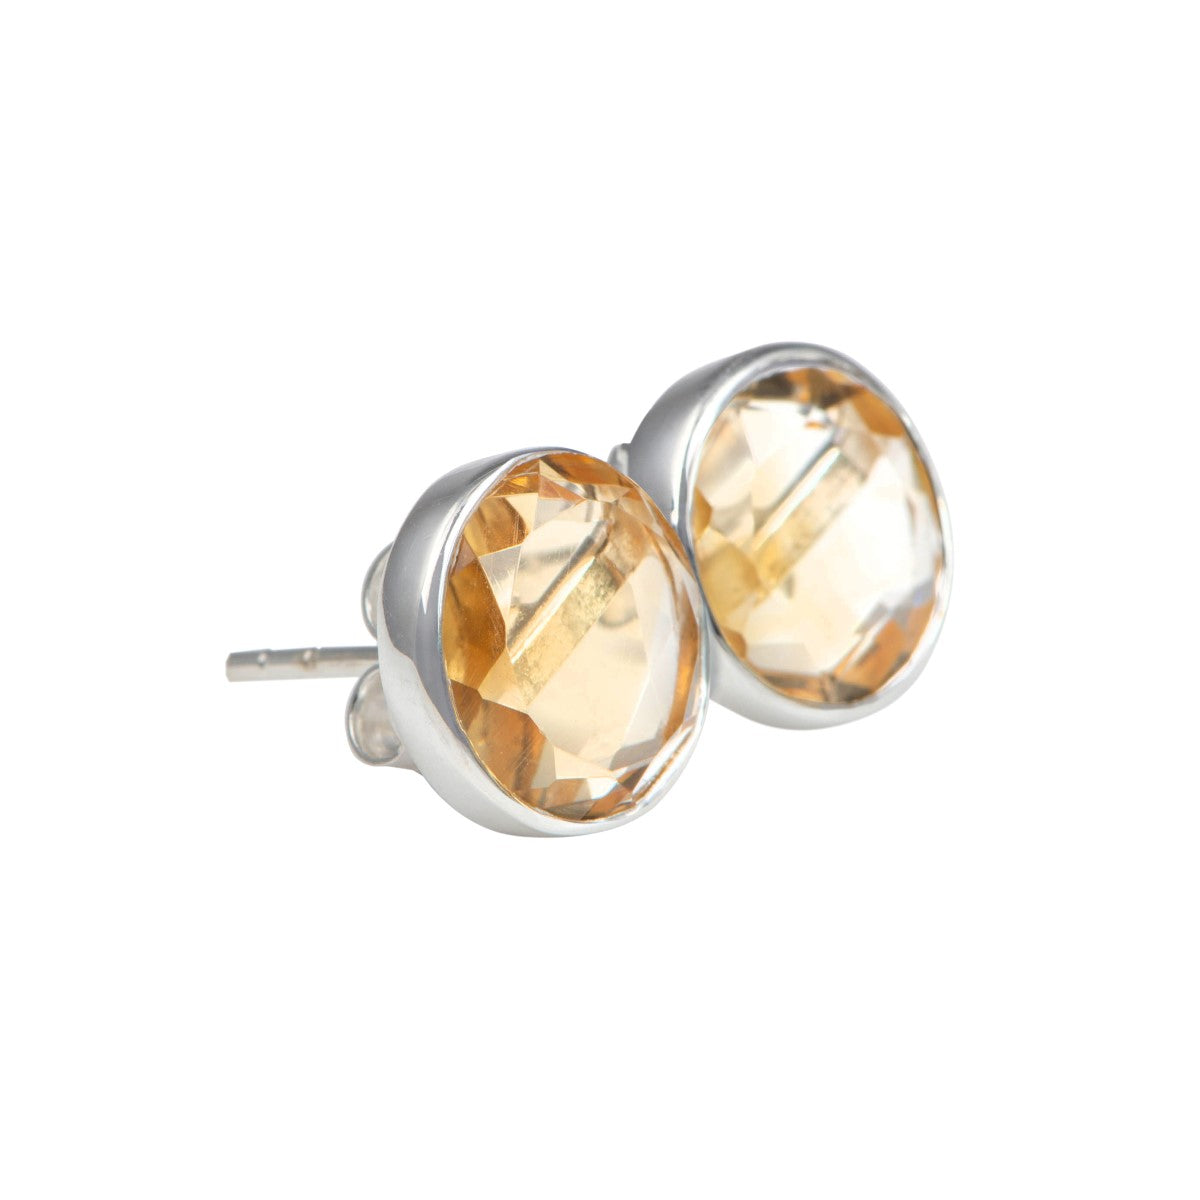 Citrine Studs in Sterling Silver with a Round Faceted Gemstone